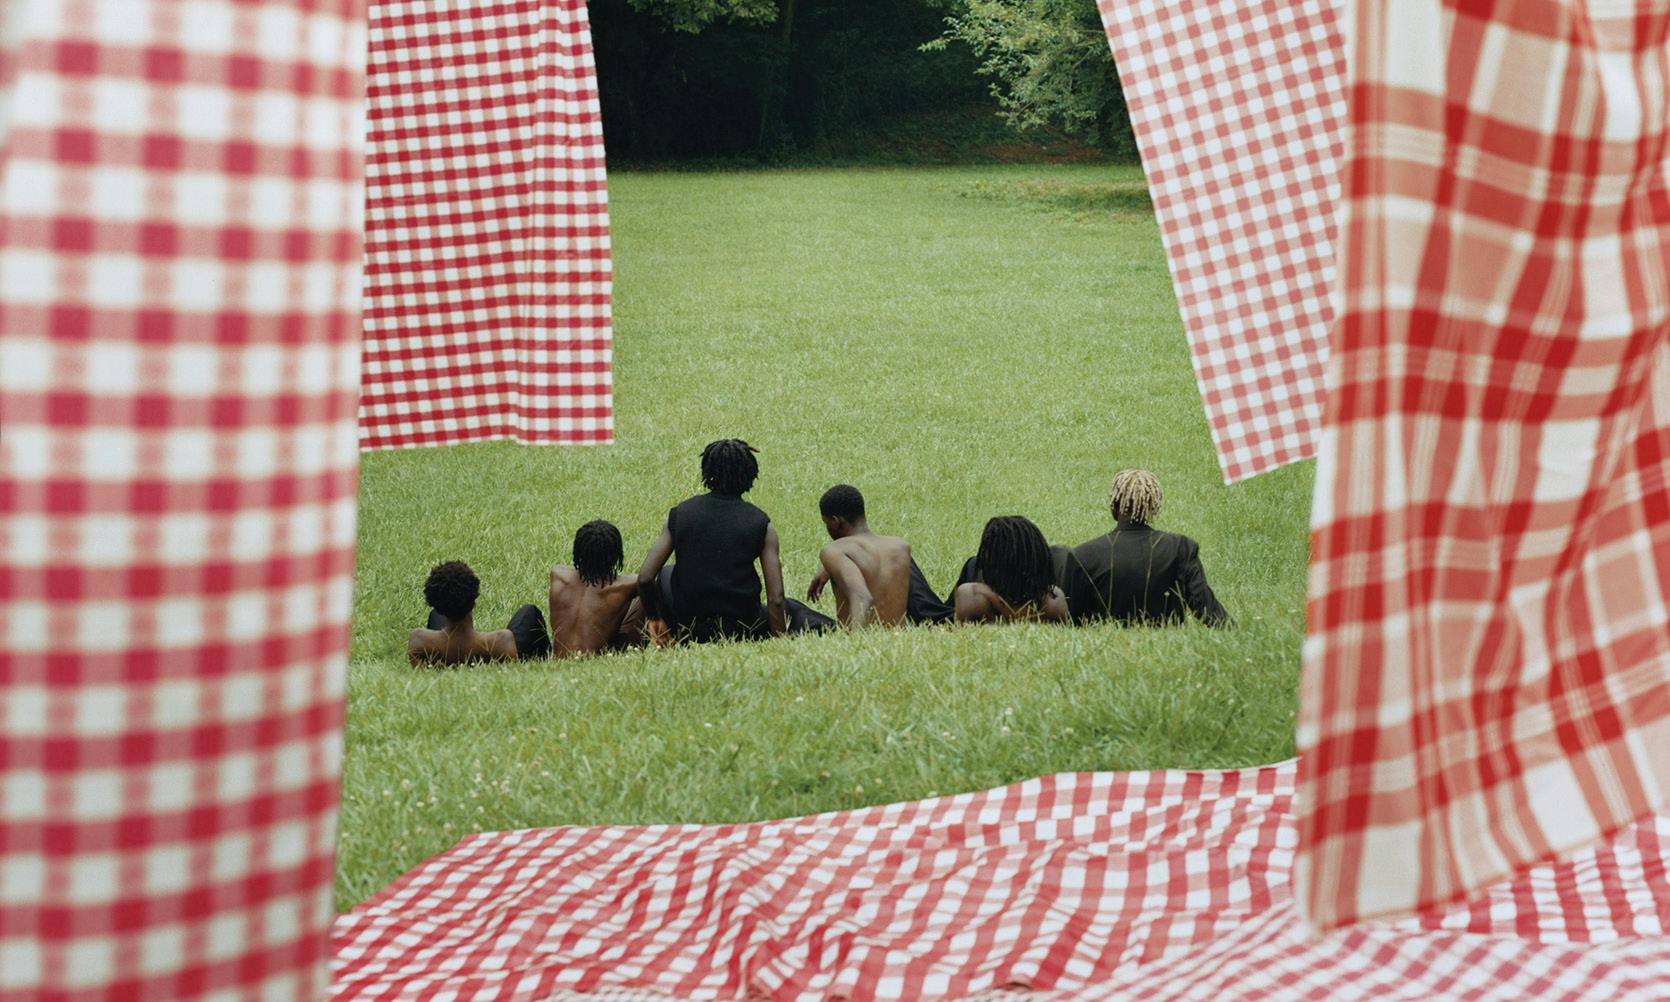 photo of people sitting in grass surrounded by gingham